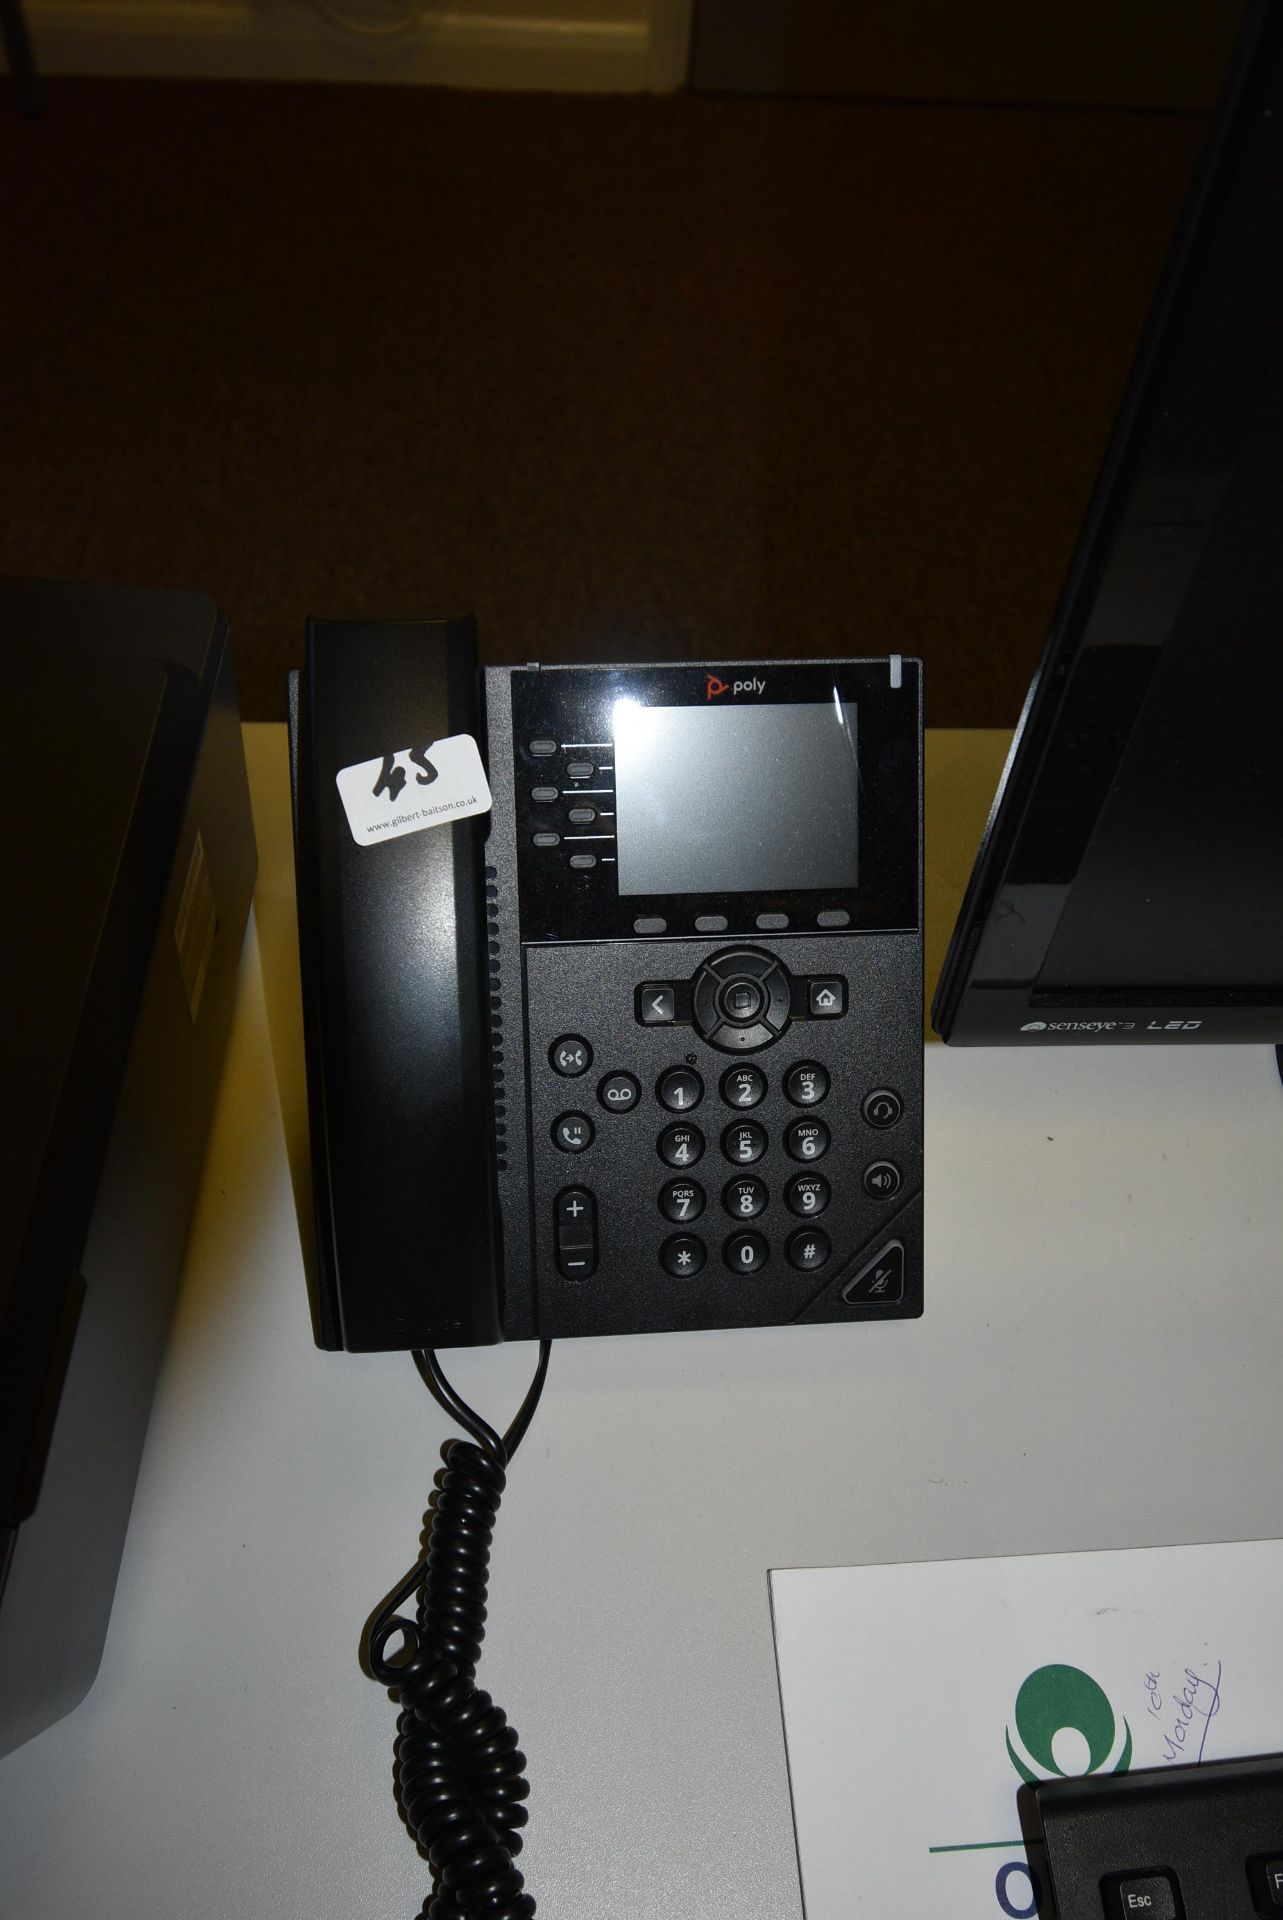 *Poly 64167FE8DC9 VOIP Telephone